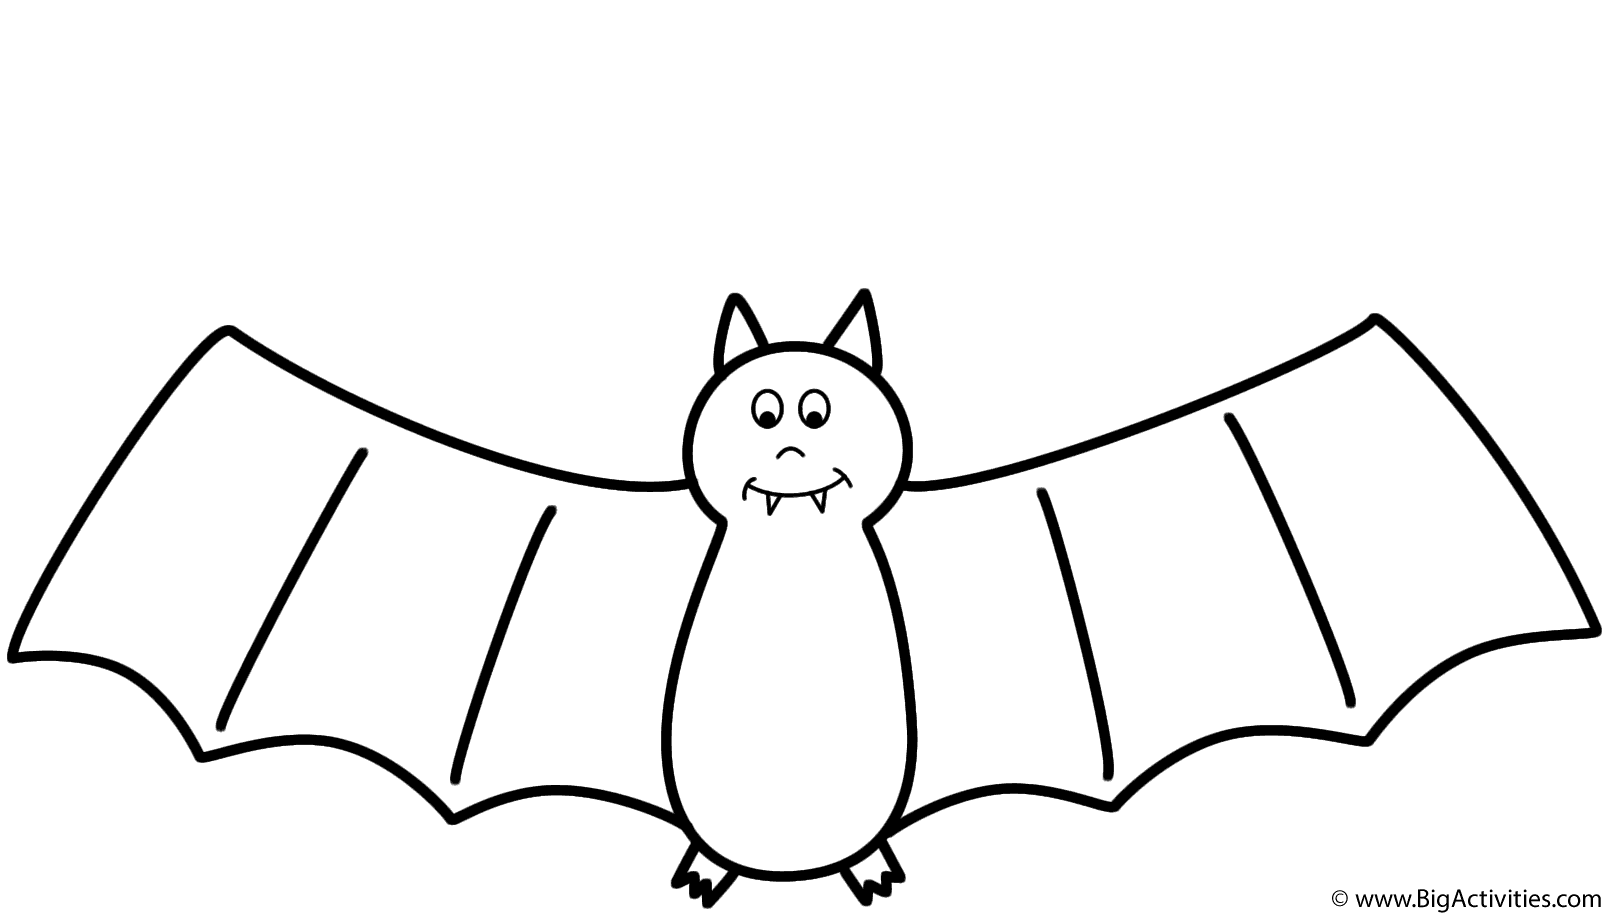 Bat coloring pages, Halloween coloring pages, Animal coloring pages